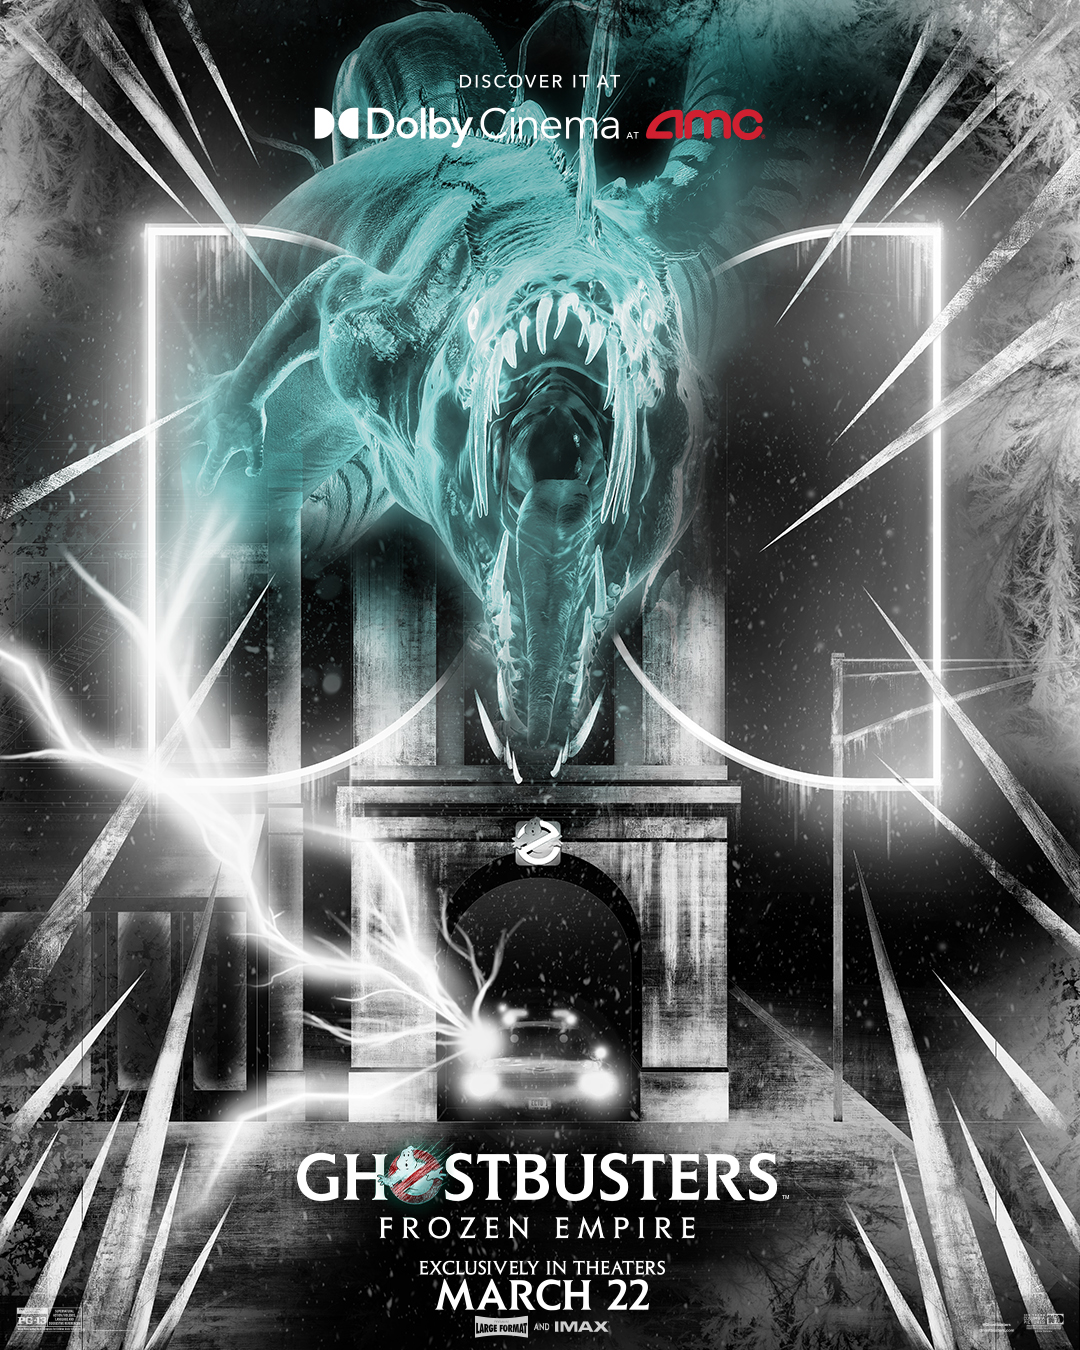 Official Sony Pictures-Ghostbusters:Frozen Empire